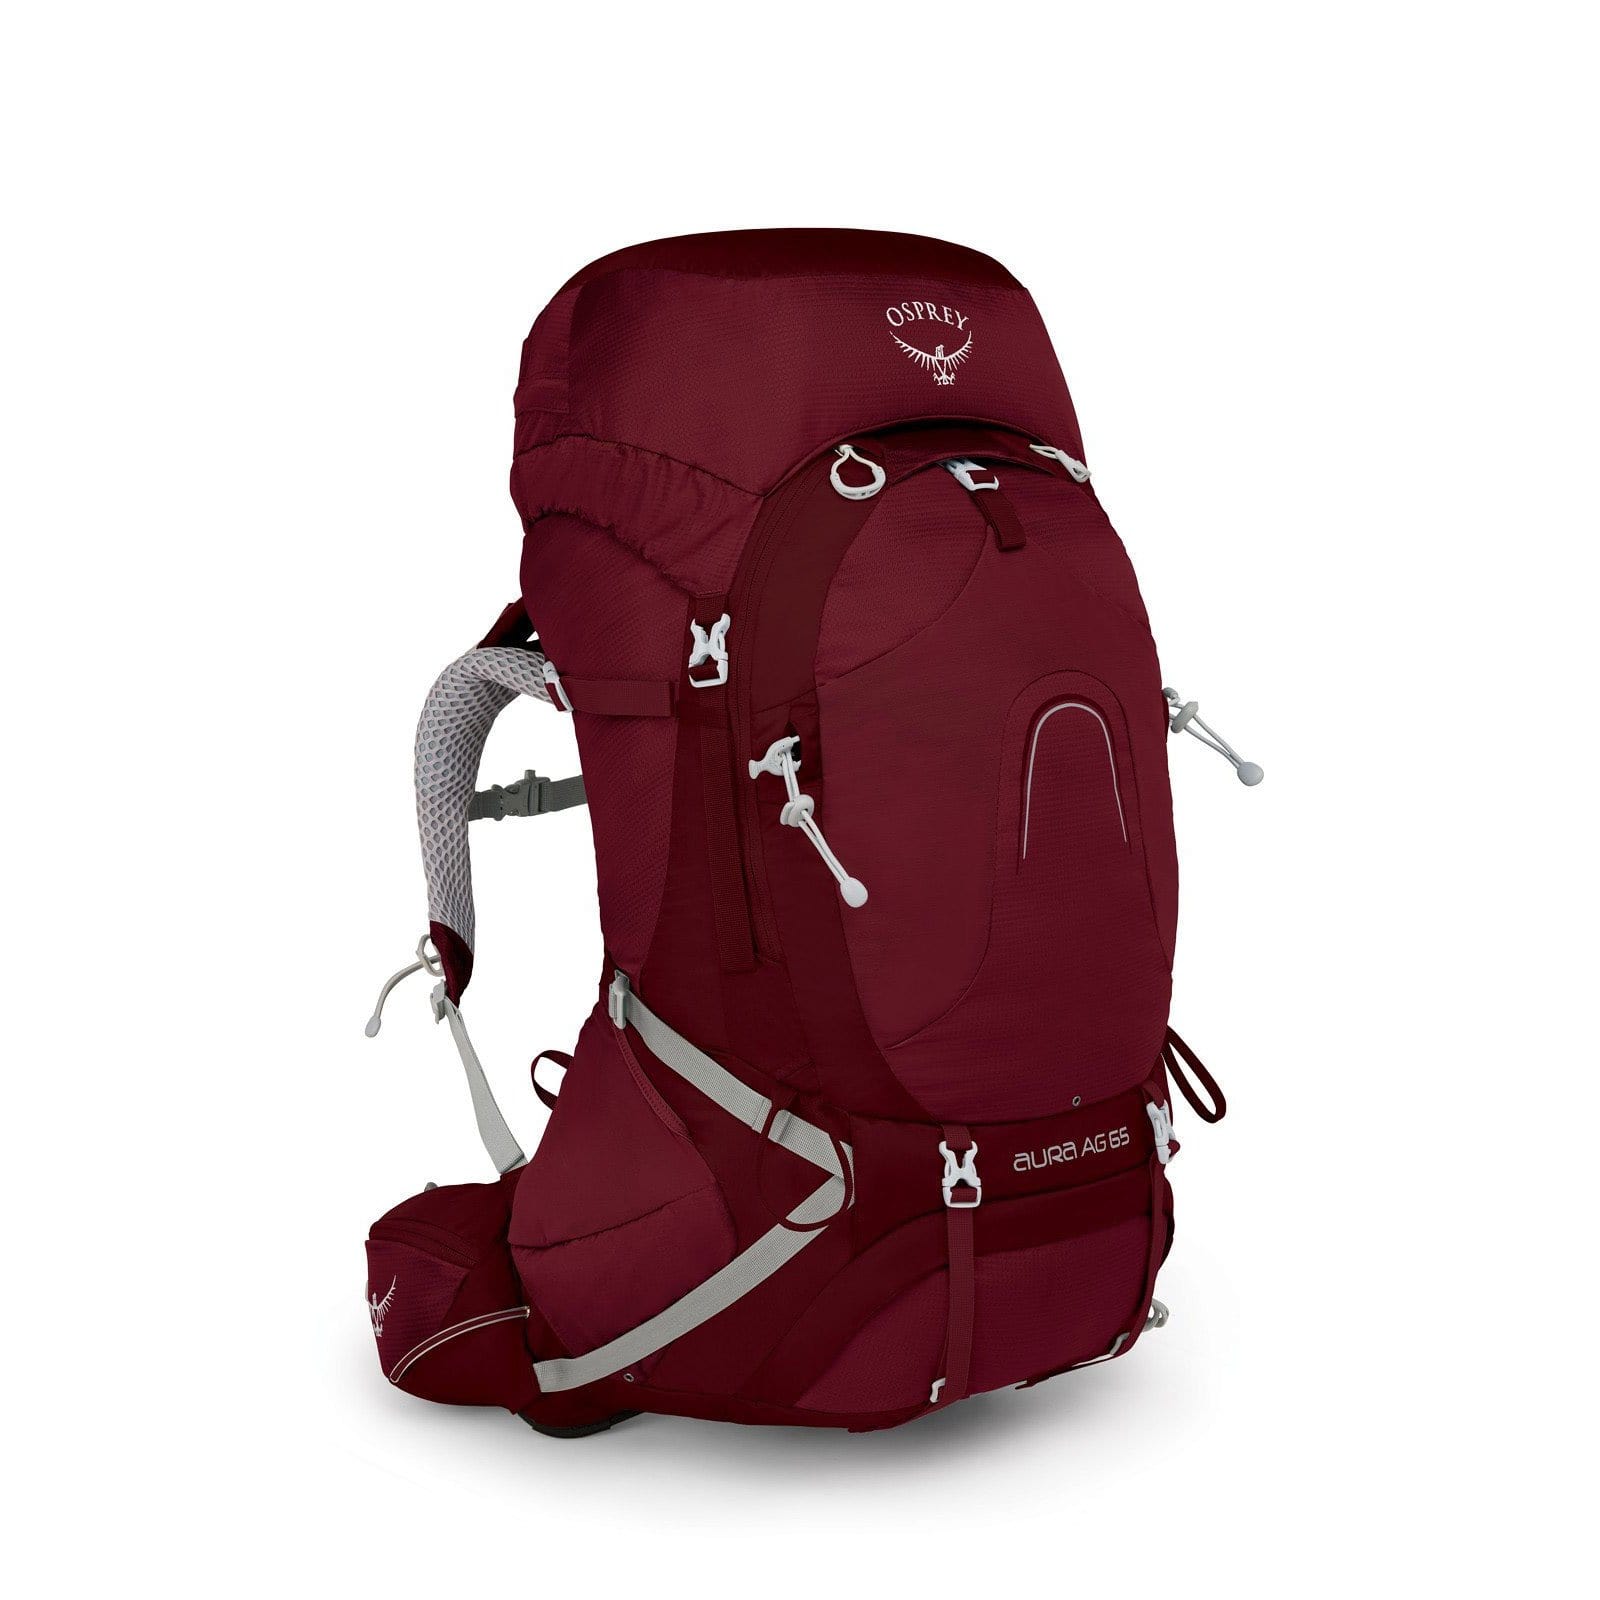 Osprey Aura AG 65 Women's Backpacking Pack Gamma Red / XS